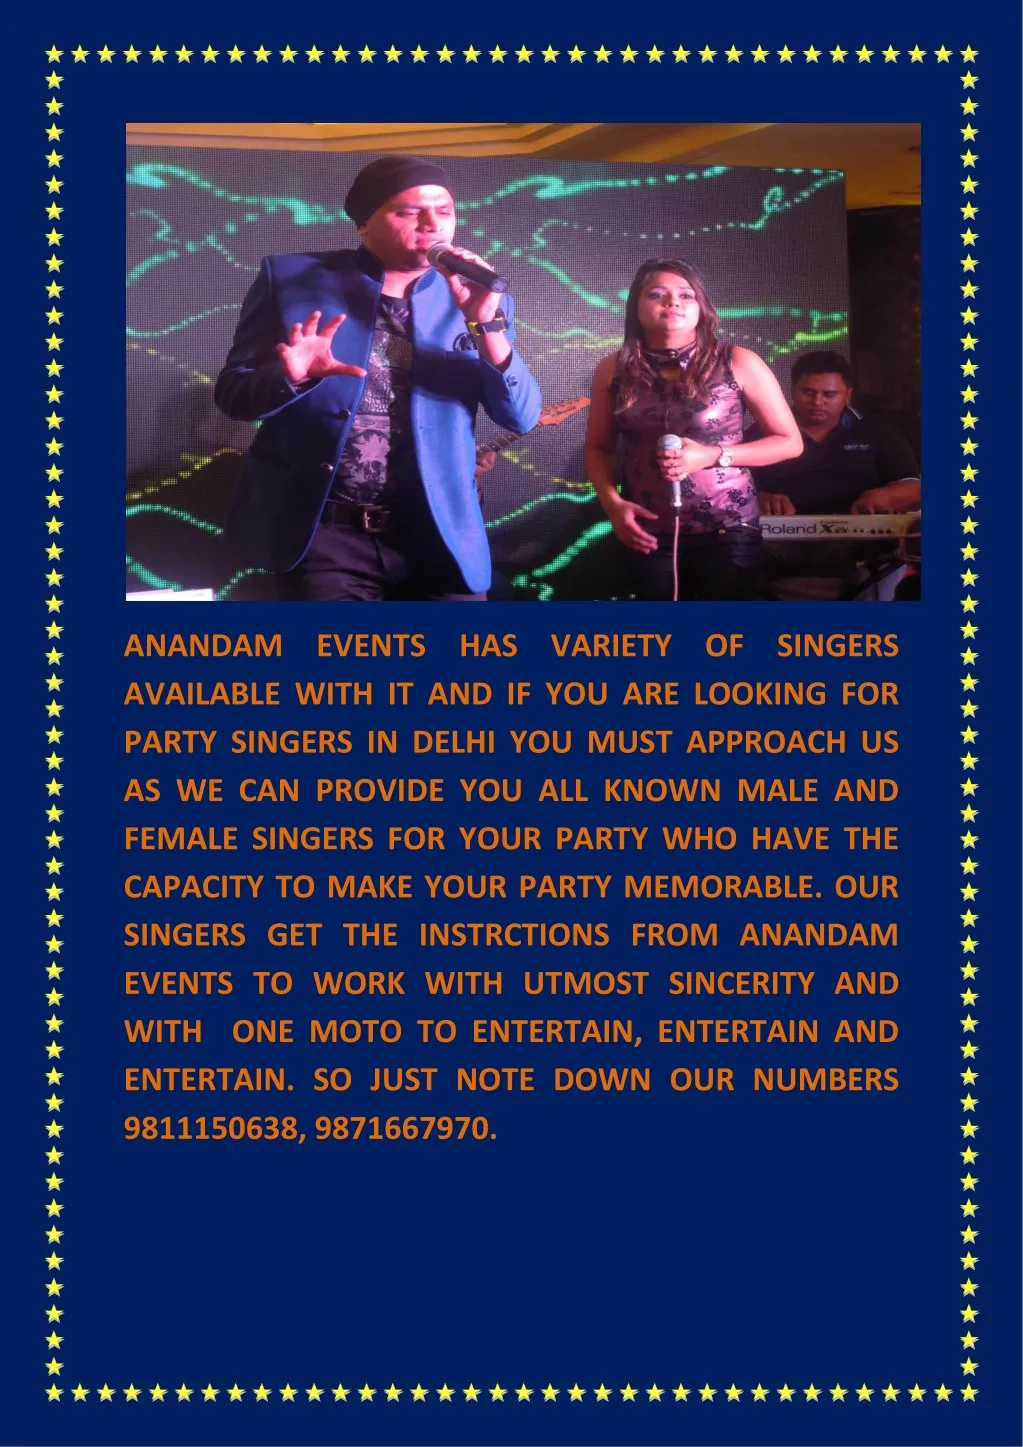 anandam events has variety of singers available